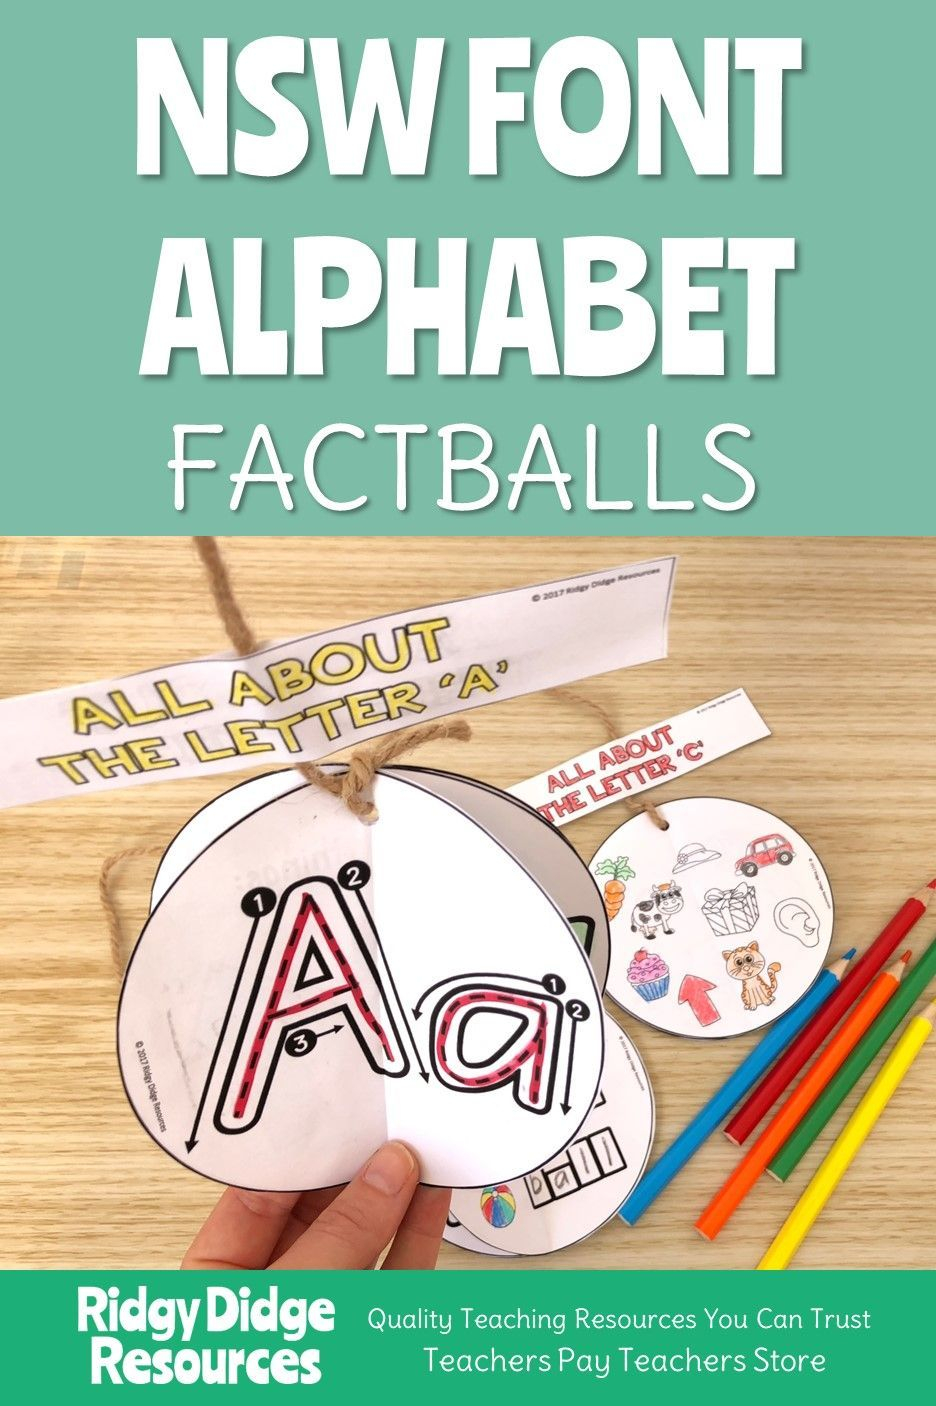 Factballs Are A Unique Craftivity That Not Only Create A